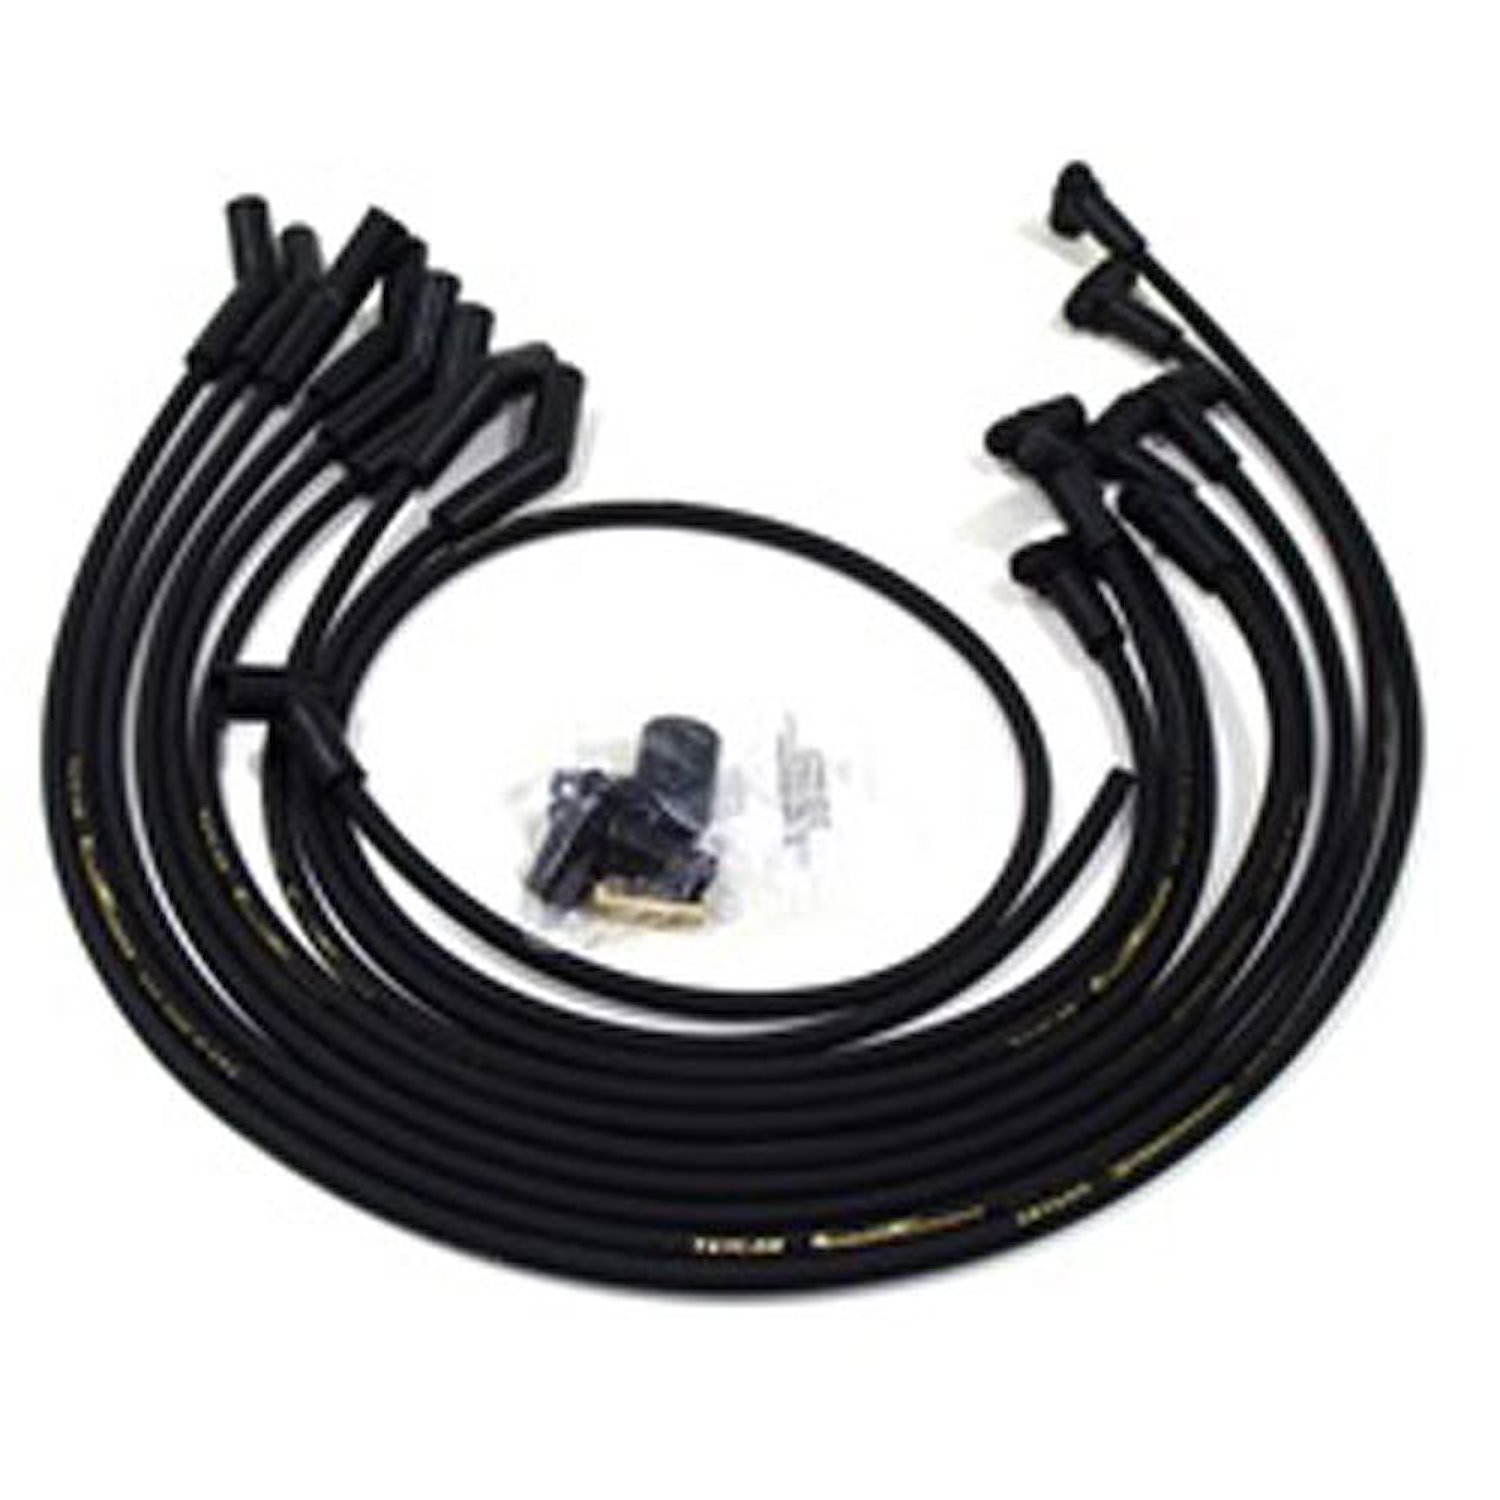 Street Thunder 8mm Spark Plug Wires Chevy Big Block (Over Valve Covers)